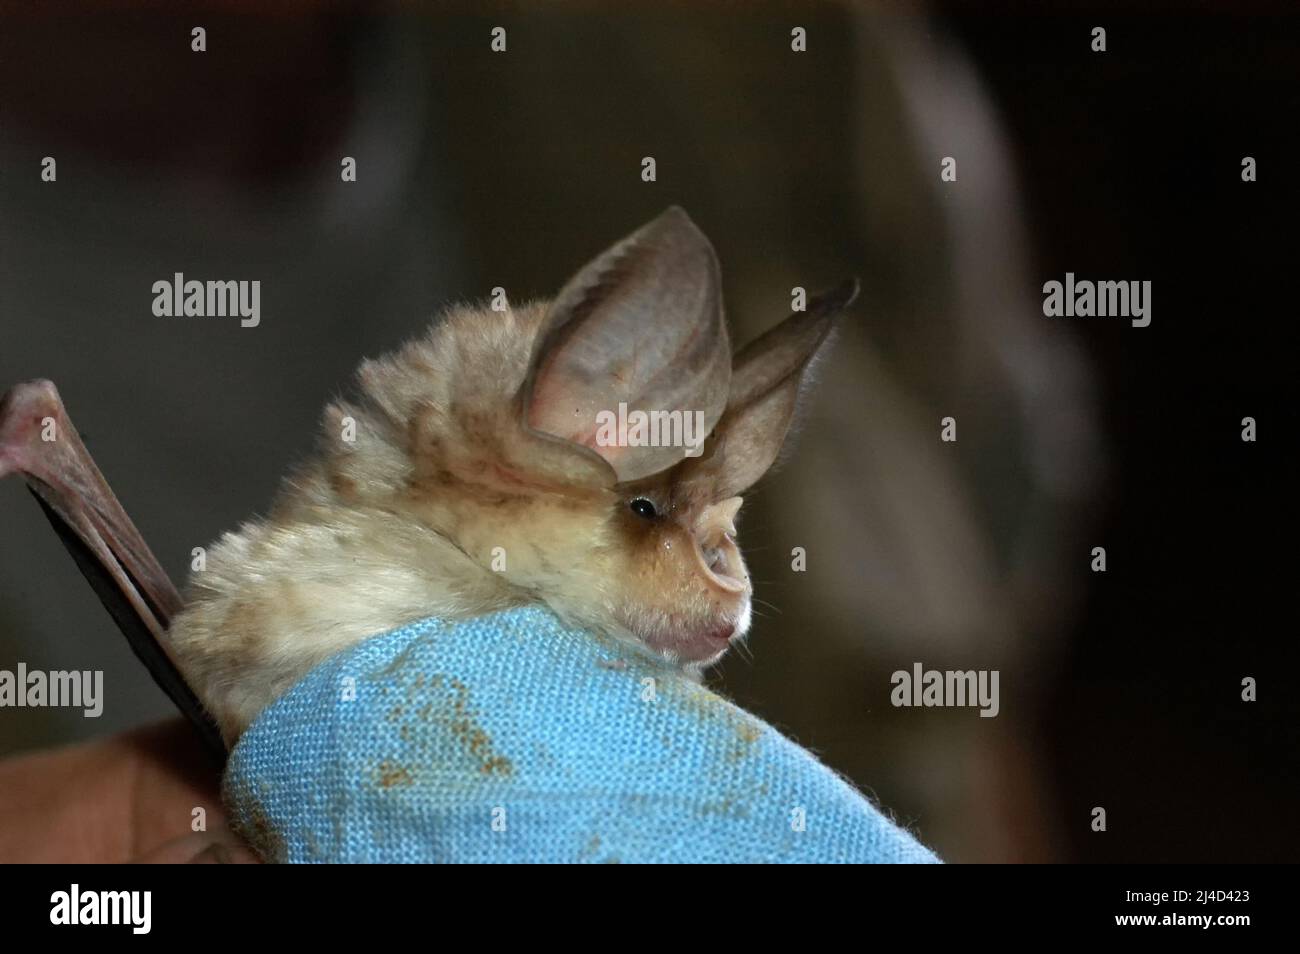 Chiropterologist holding and studying a bat in his hands Stock Photo